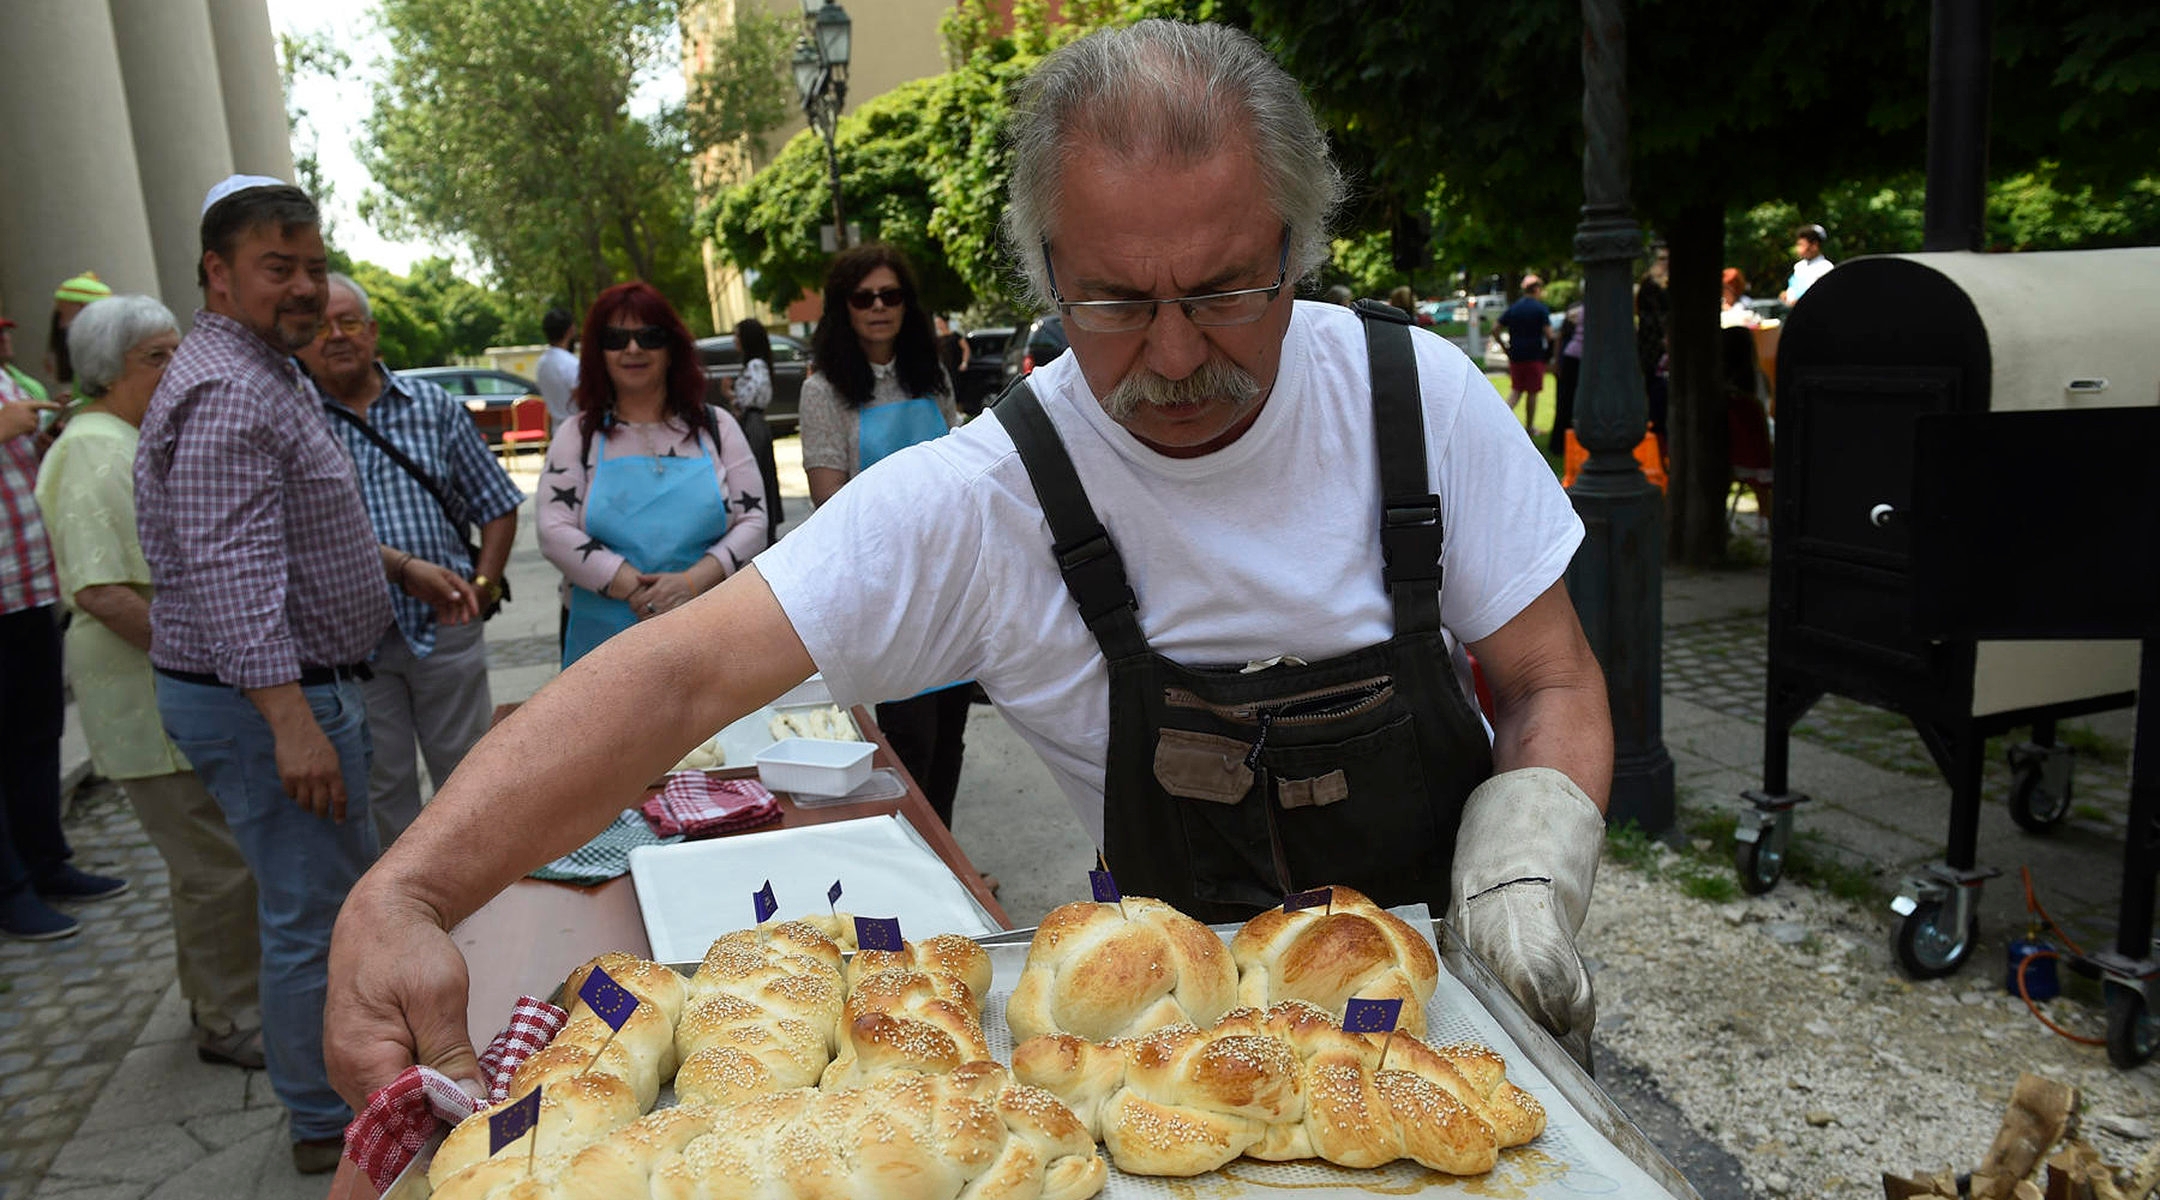 Hungarian Jews baking challah breads in front of the Obuda Synagogue in Budapest, Hungary on Oct. 7, 2019. (Courtesy of EMIH)